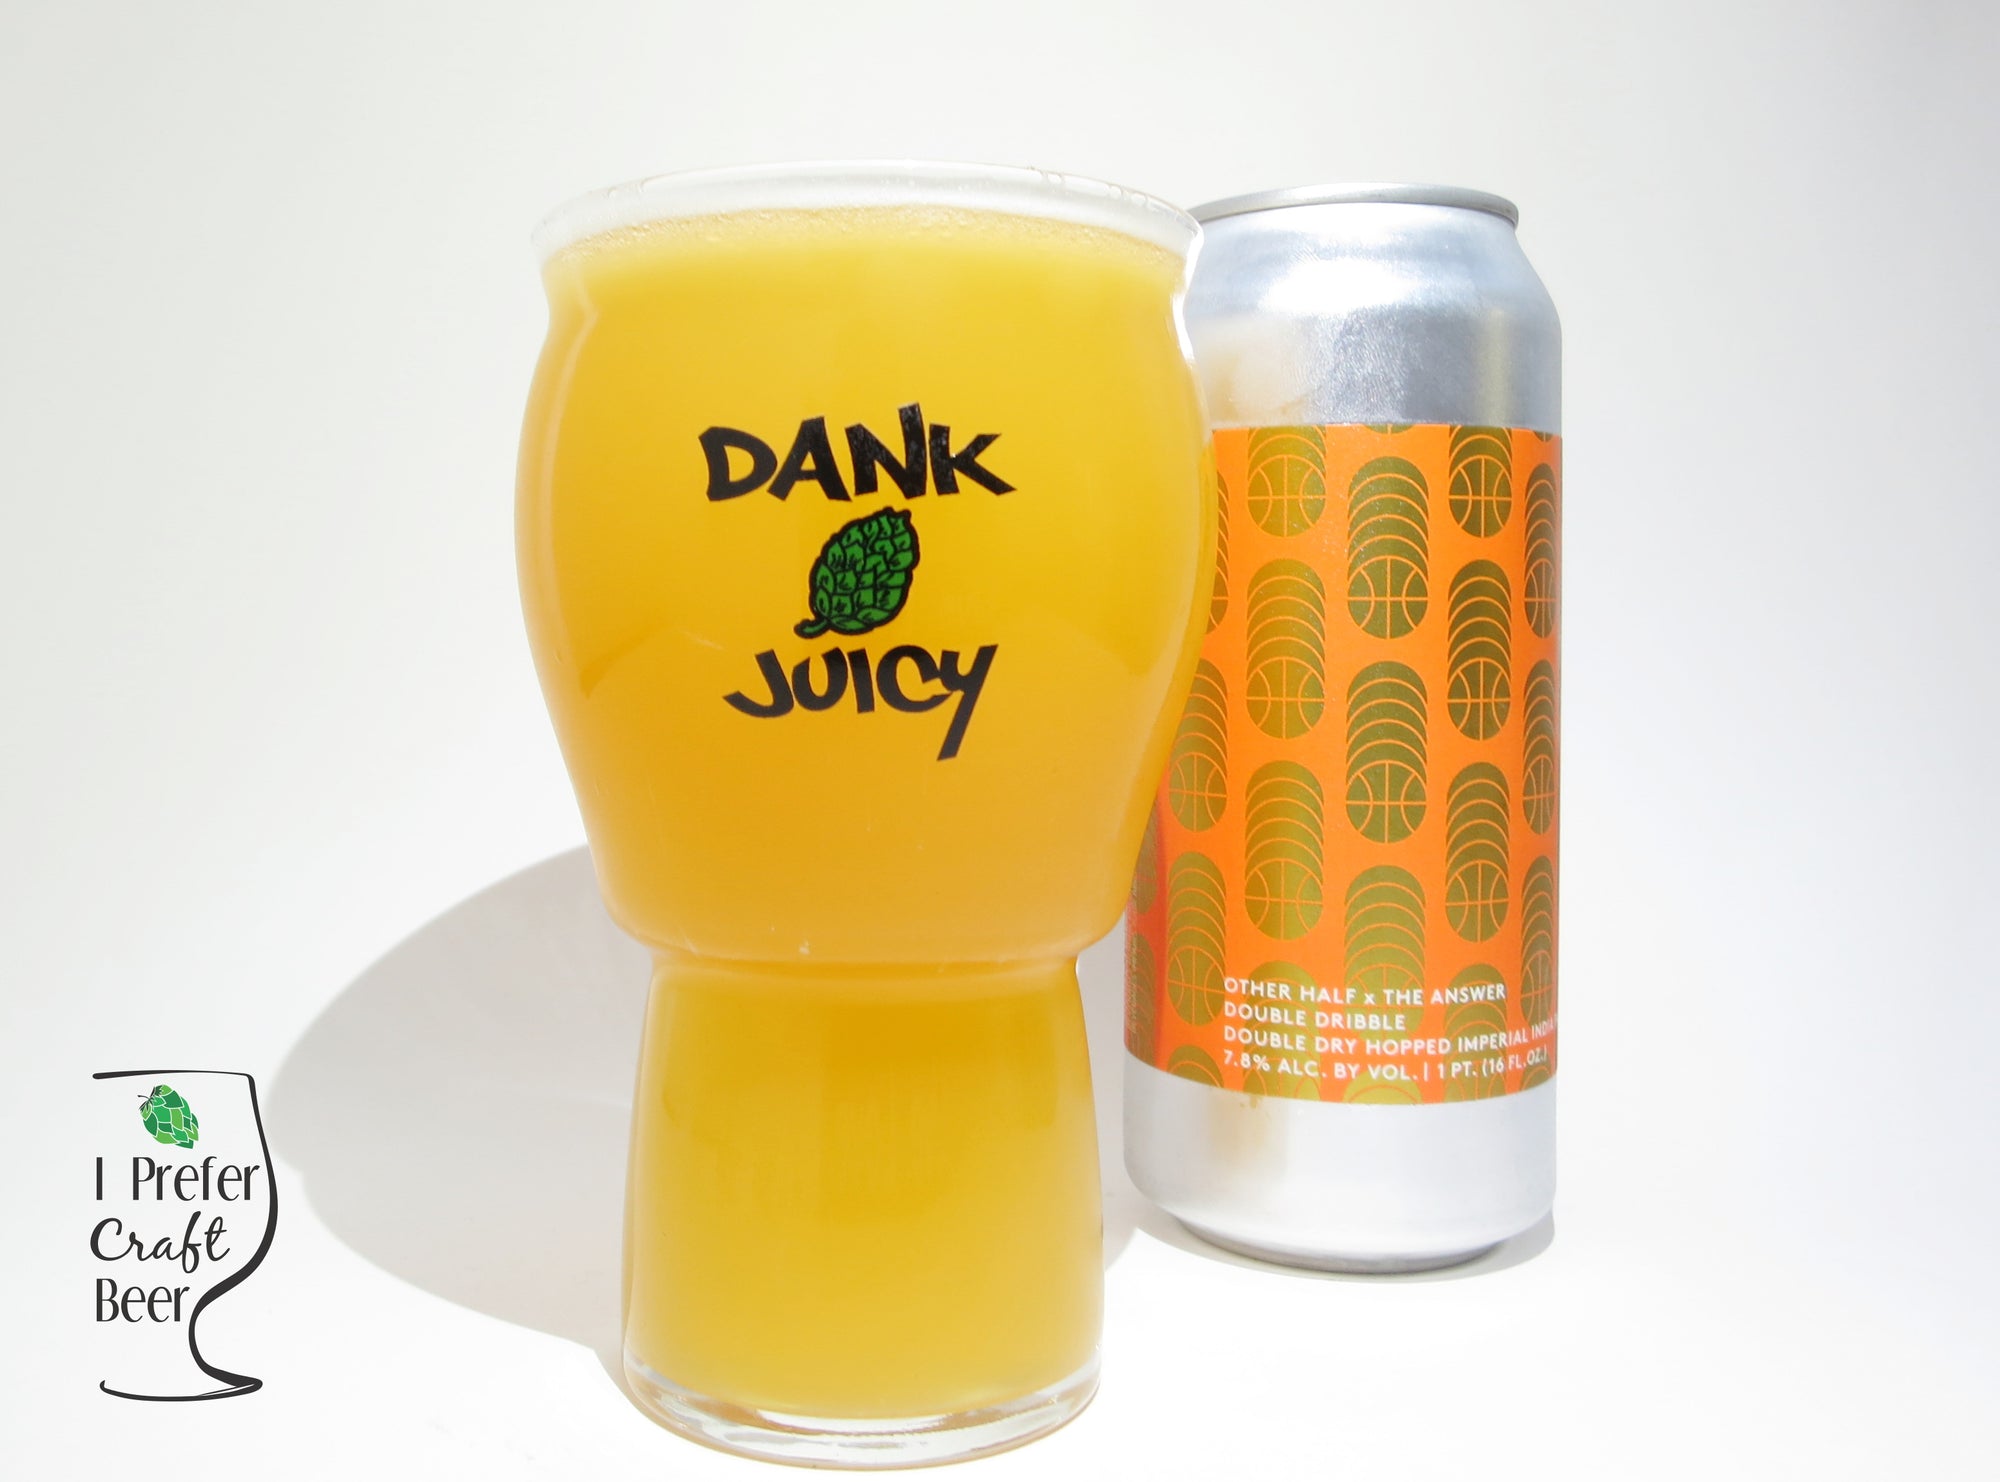 Double IPA double dry-hopped (dry hopping) in Dank & Juicy Craft Beer IPA Glass